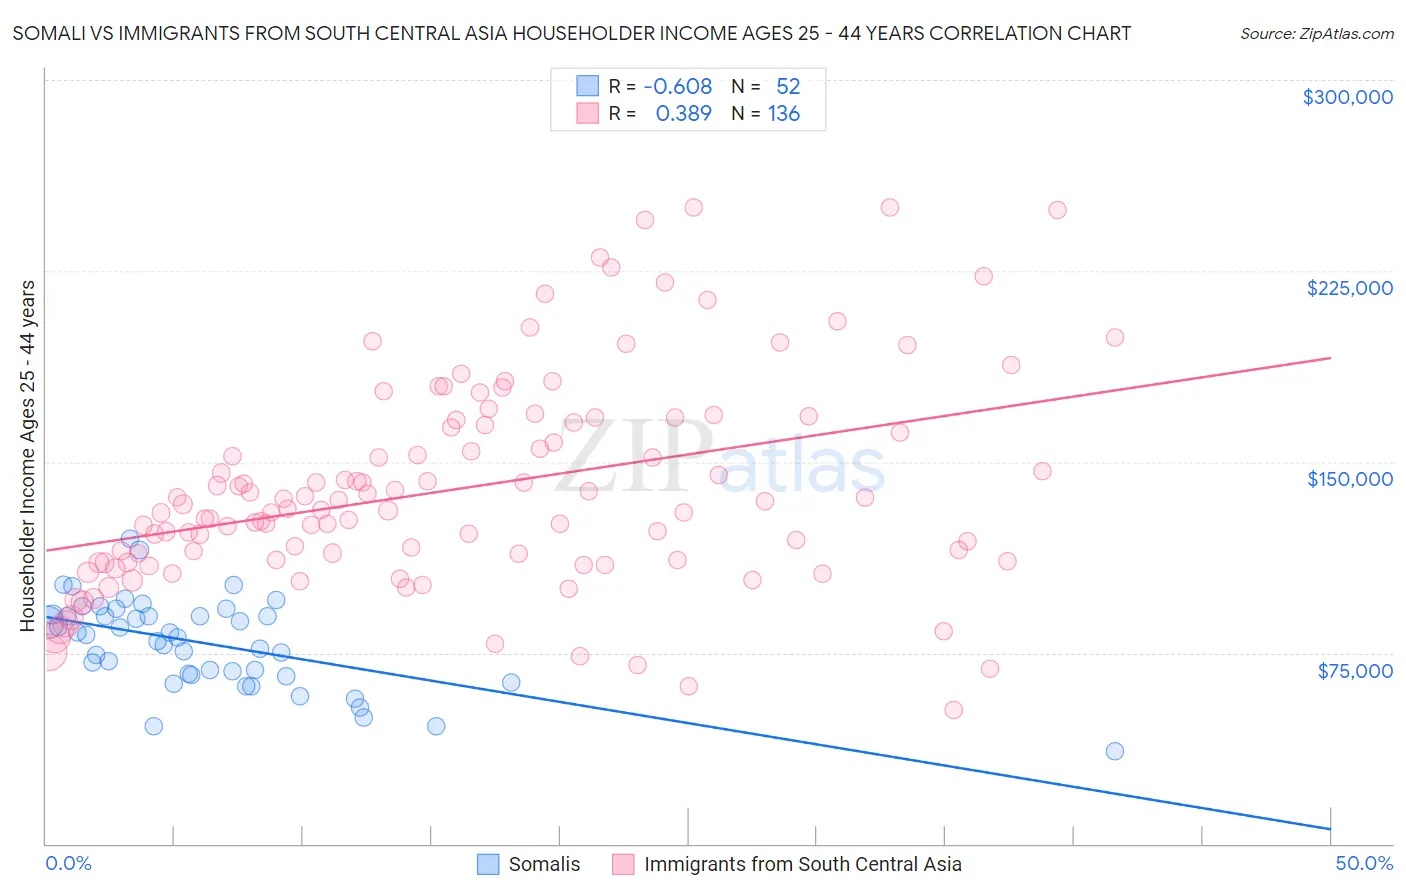 Somali vs Immigrants from South Central Asia Householder Income Ages 25 - 44 years